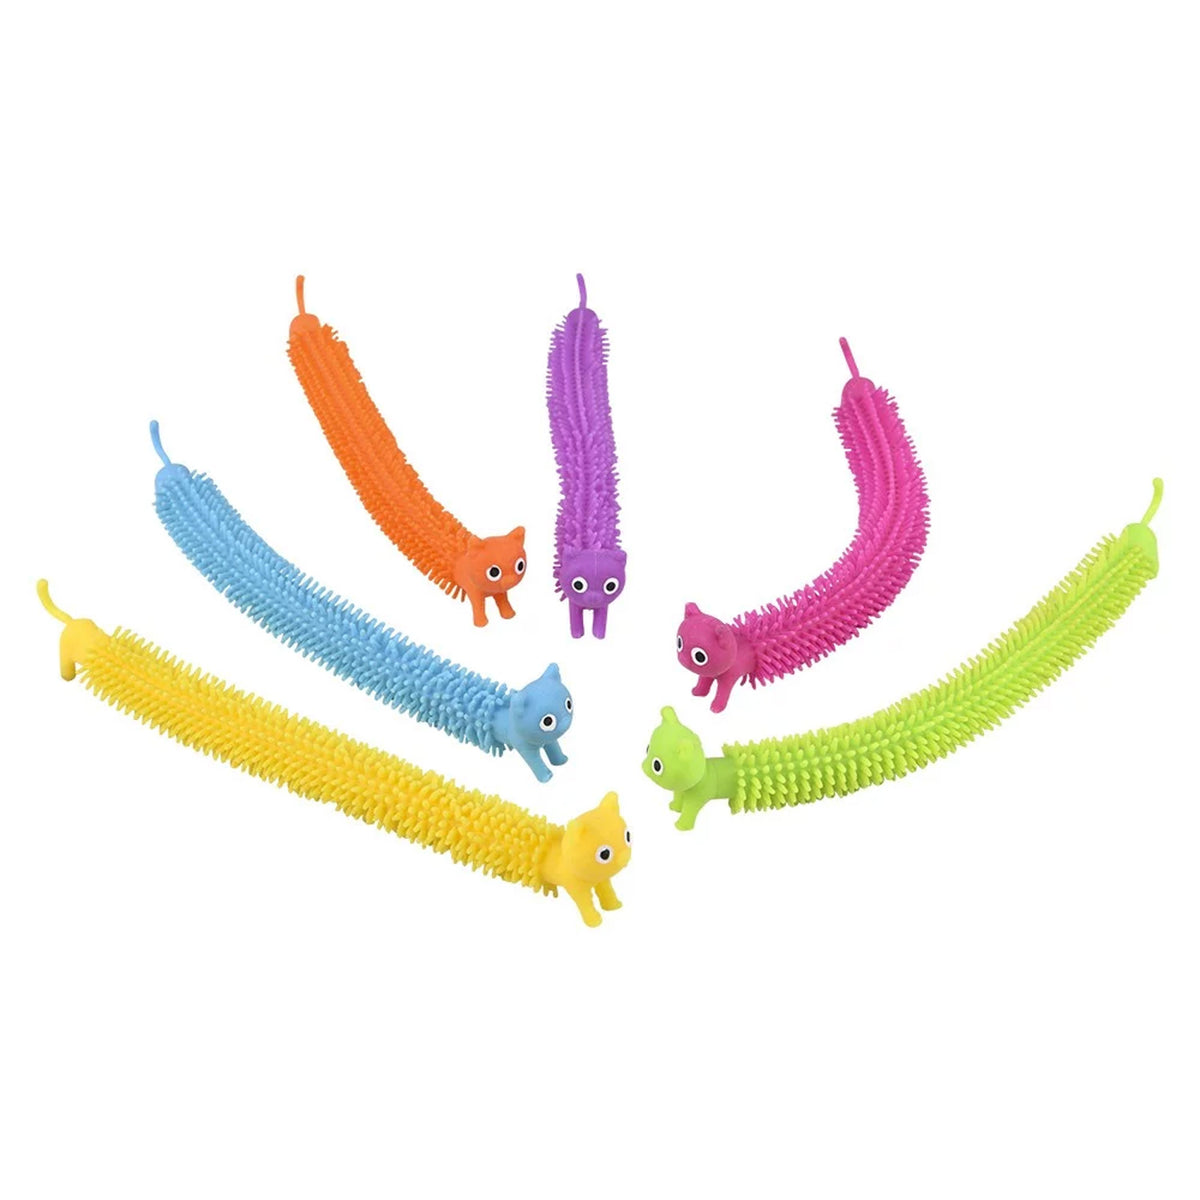 Cat Stretchy String For Kids In Bulk- Assorted